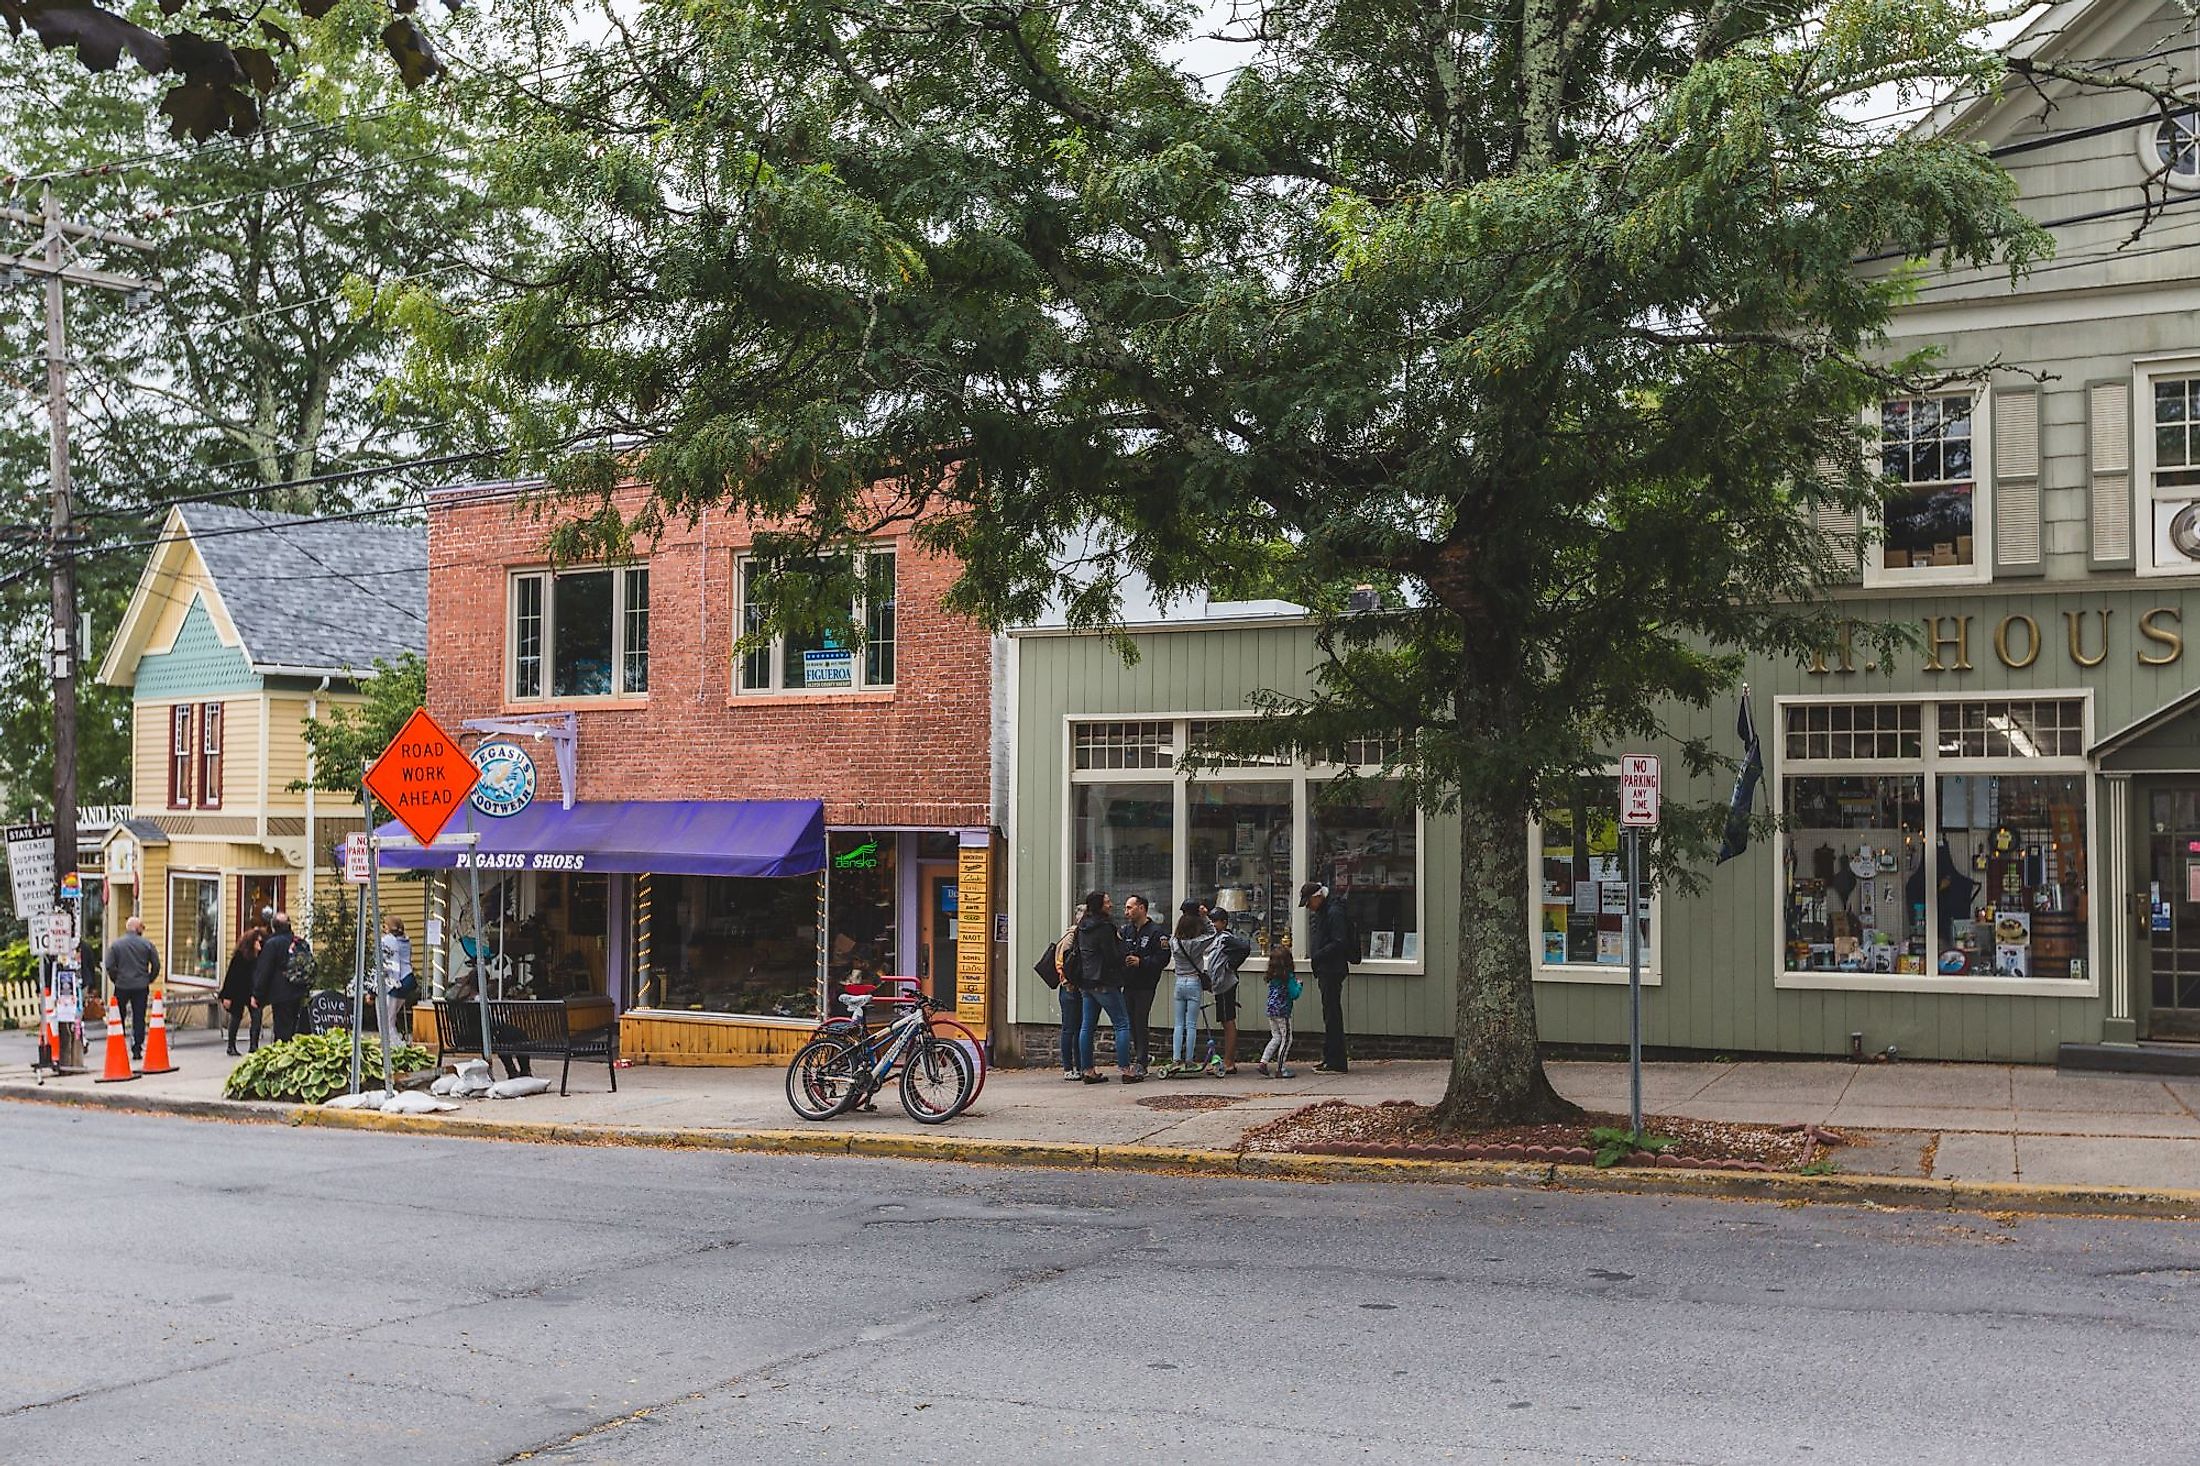 A view of the street and stores in Woodstock, New York. Editorial credit: solepsizm / Shutterstock.com